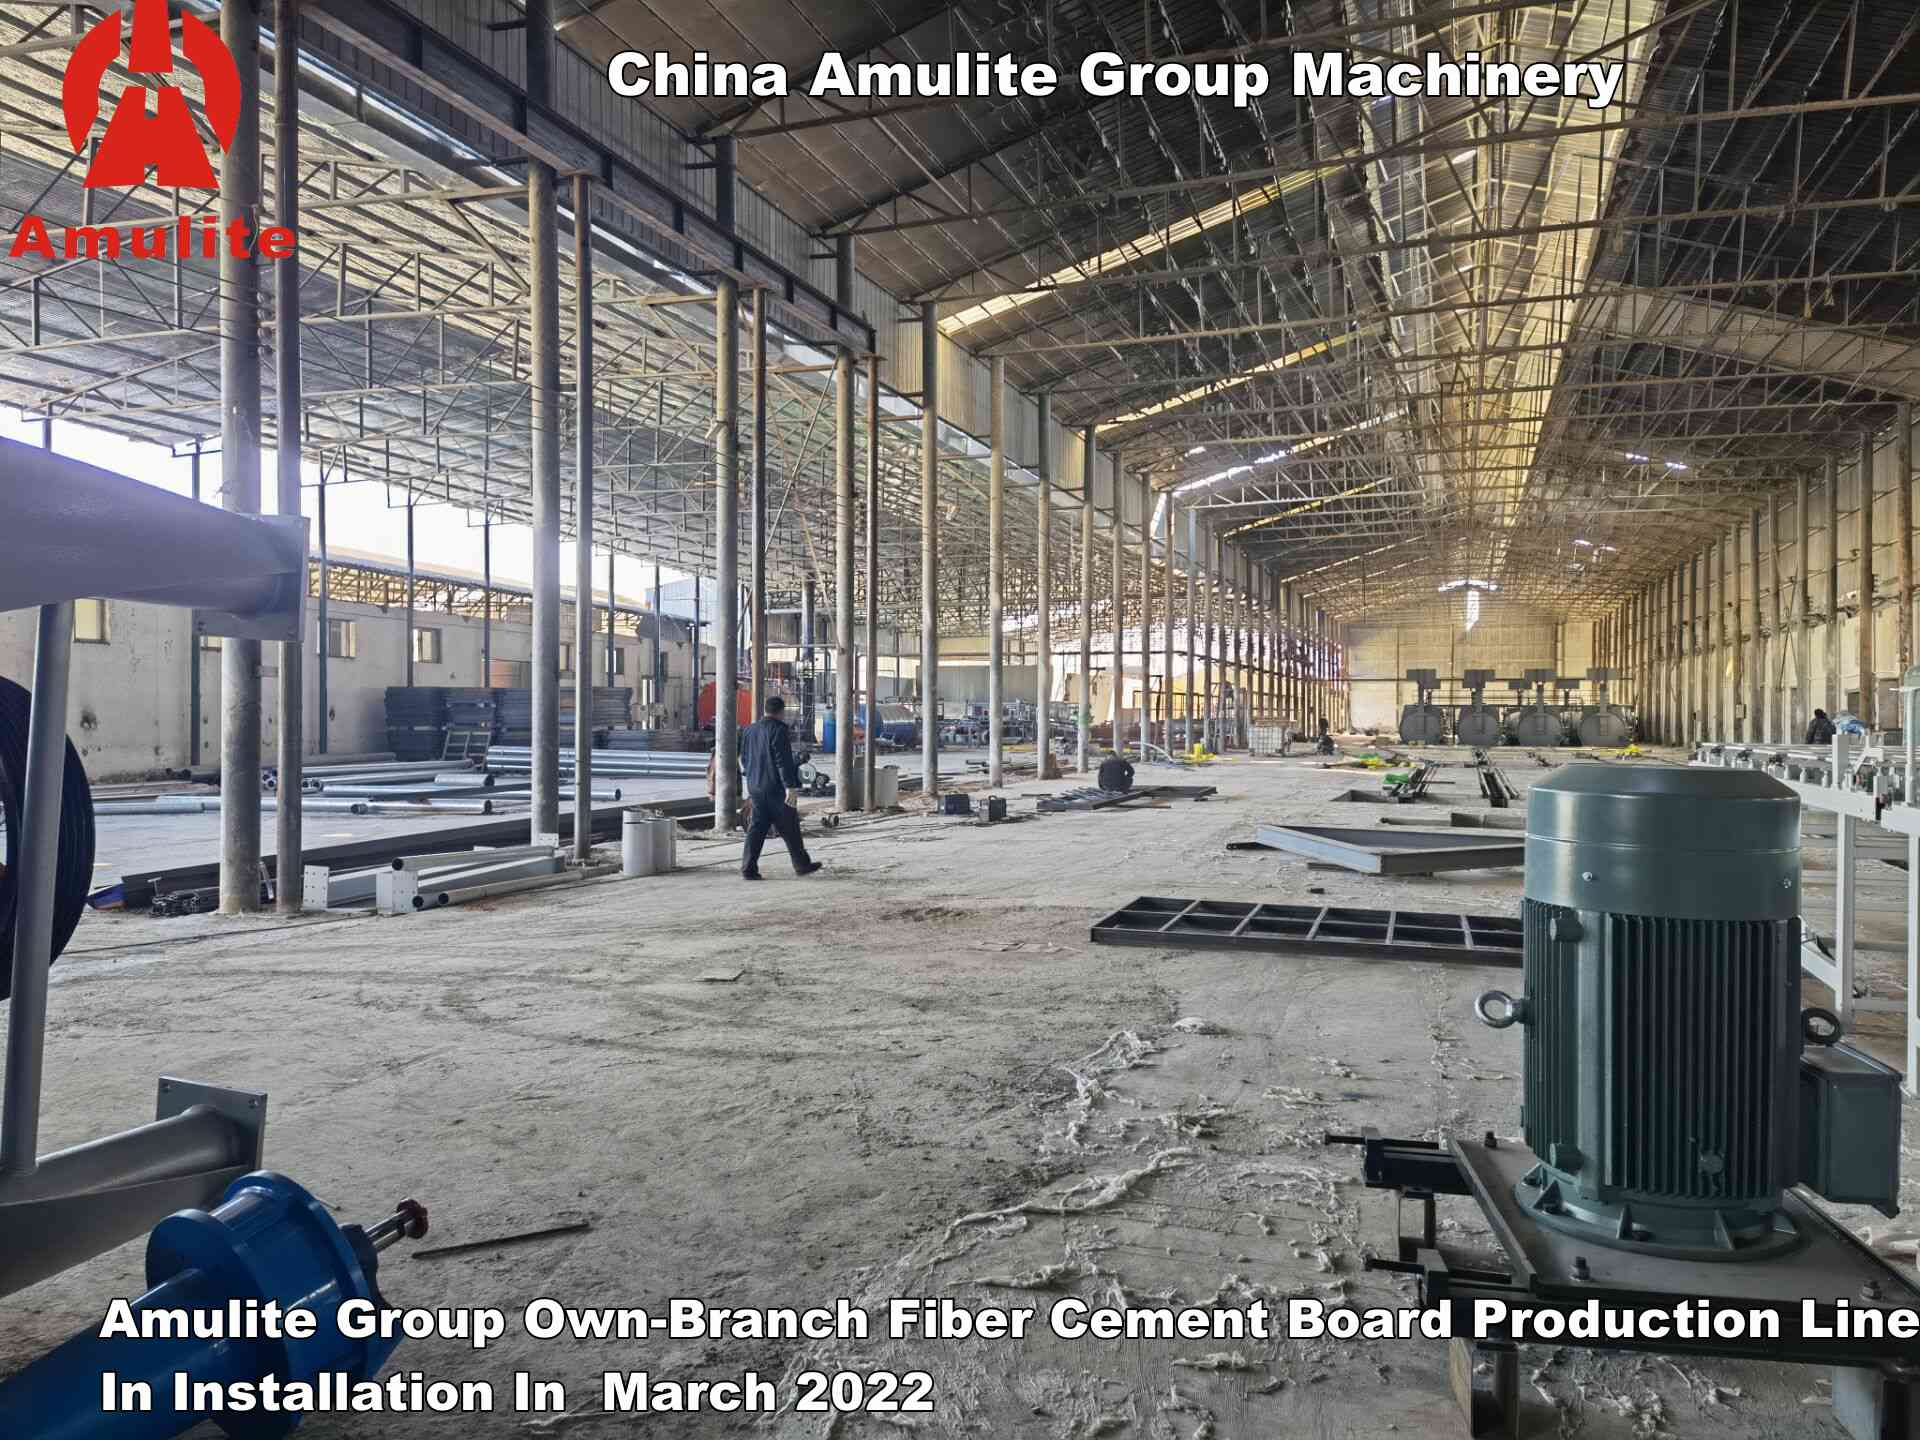 Amulite Group Own-Branch Fiber Cement Board Production Line In Installation In  March 2022 (8)